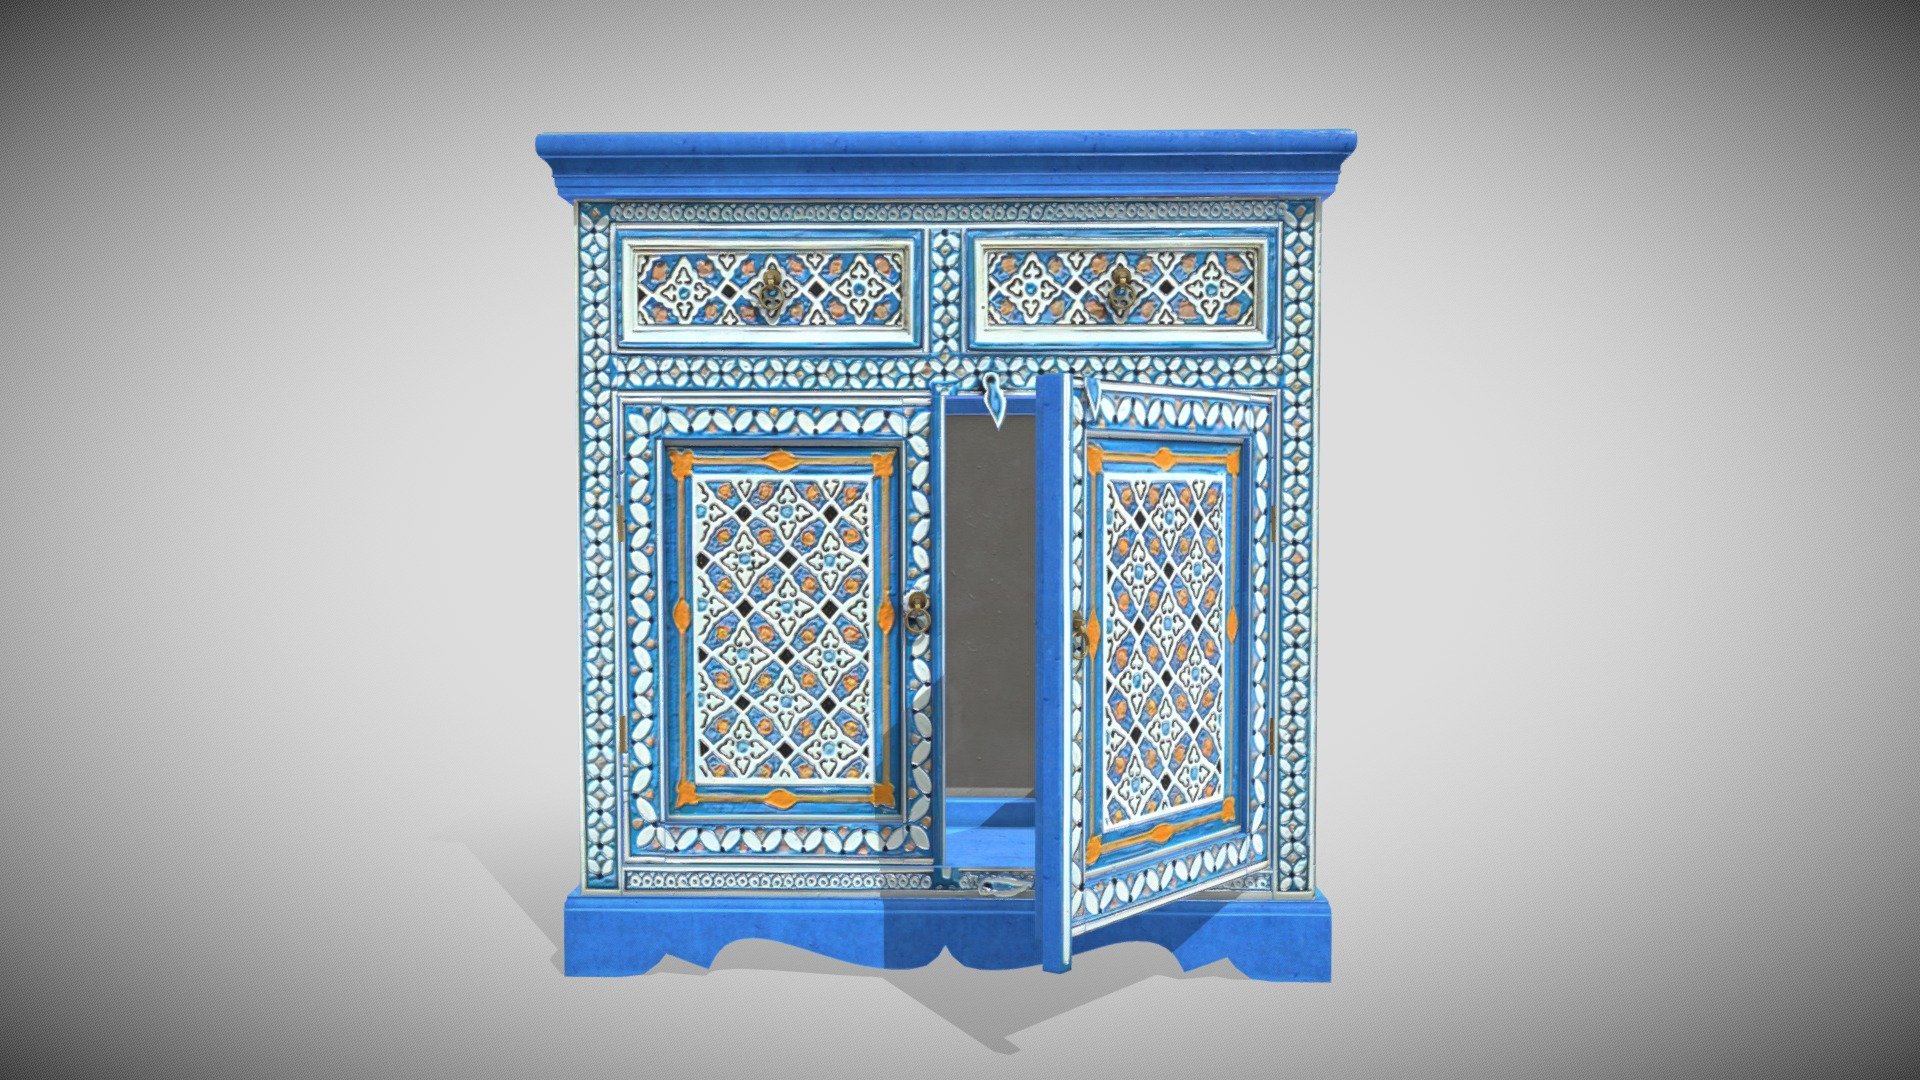 One Material PBR Metalness 4k (png)

All Quad

Openable Doors

Can be subdivided - Painted Shelf - Bluolo - Buy Royalty Free 3D model by Francesco Coldesina (@topfrank2013) 3d model